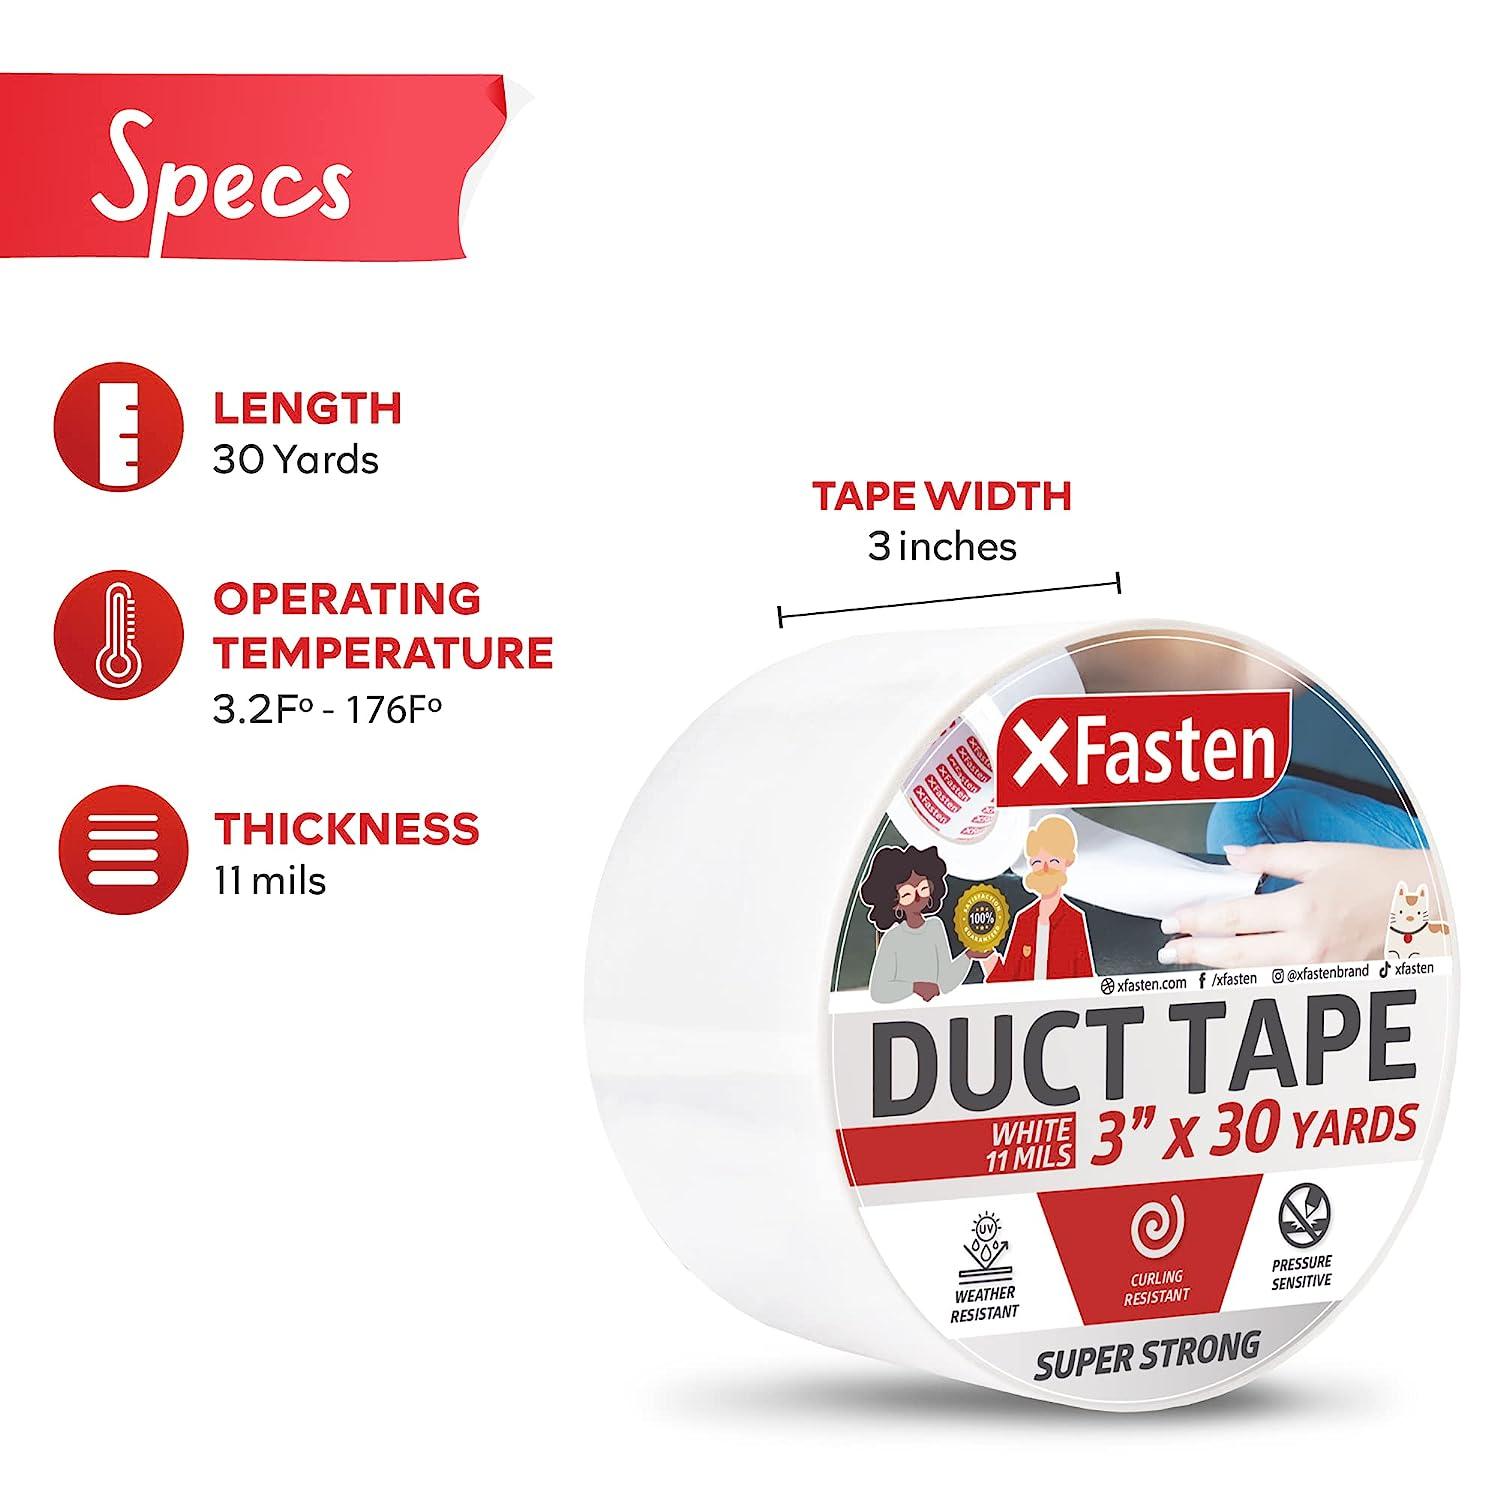 XFasten Double Sided Woodworking Tape